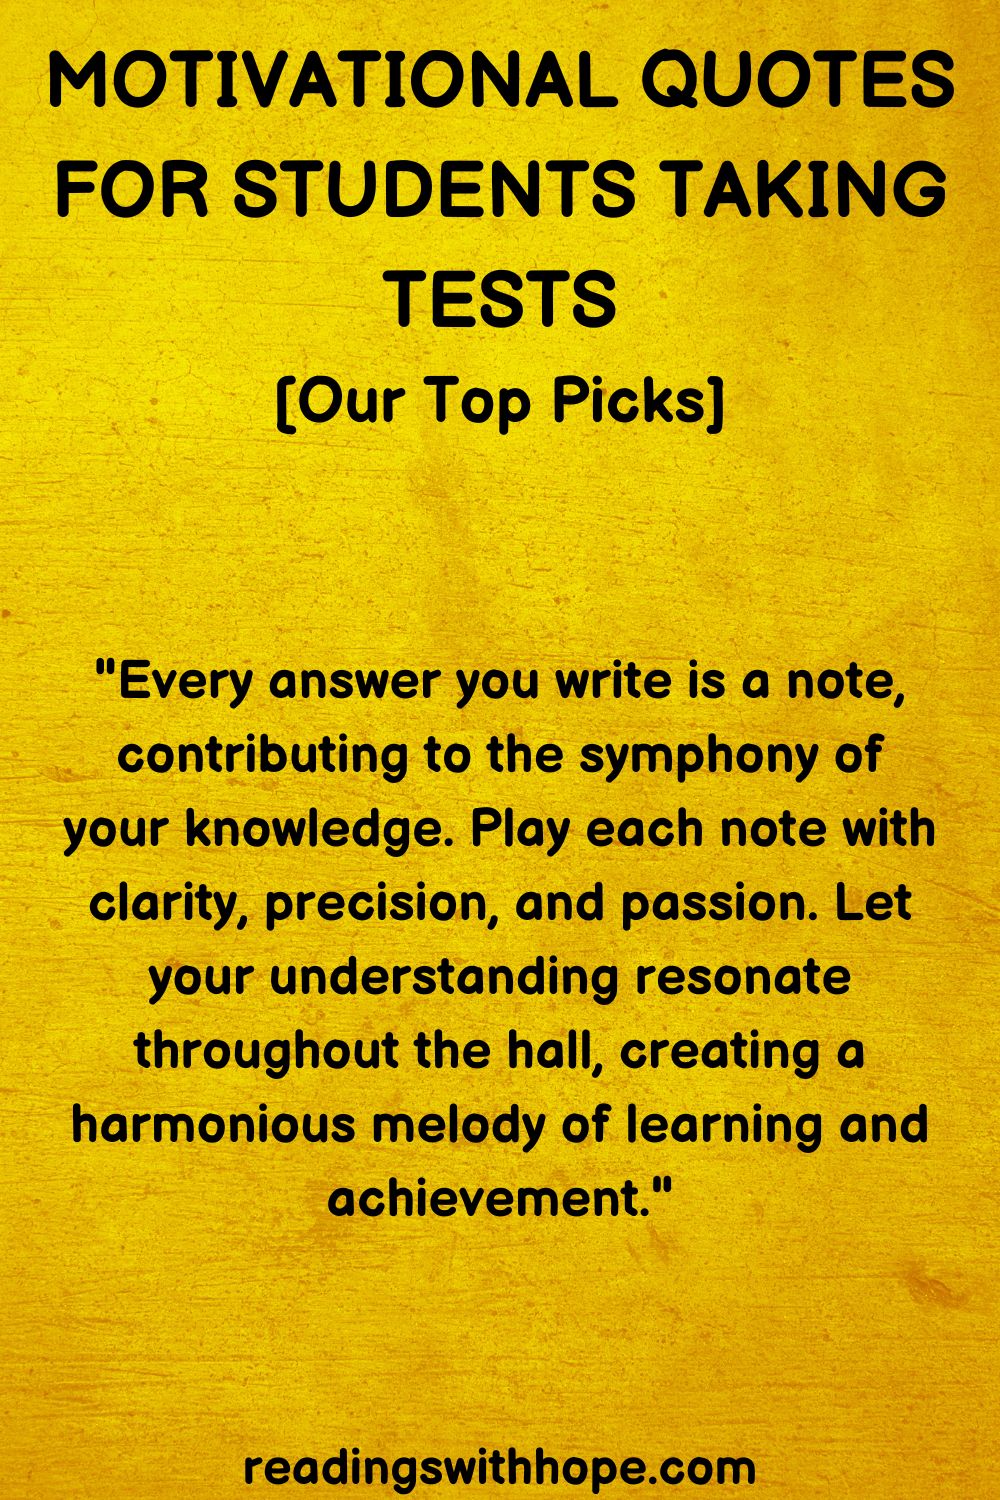 30 Motivational Quotes For Students Taking Tests